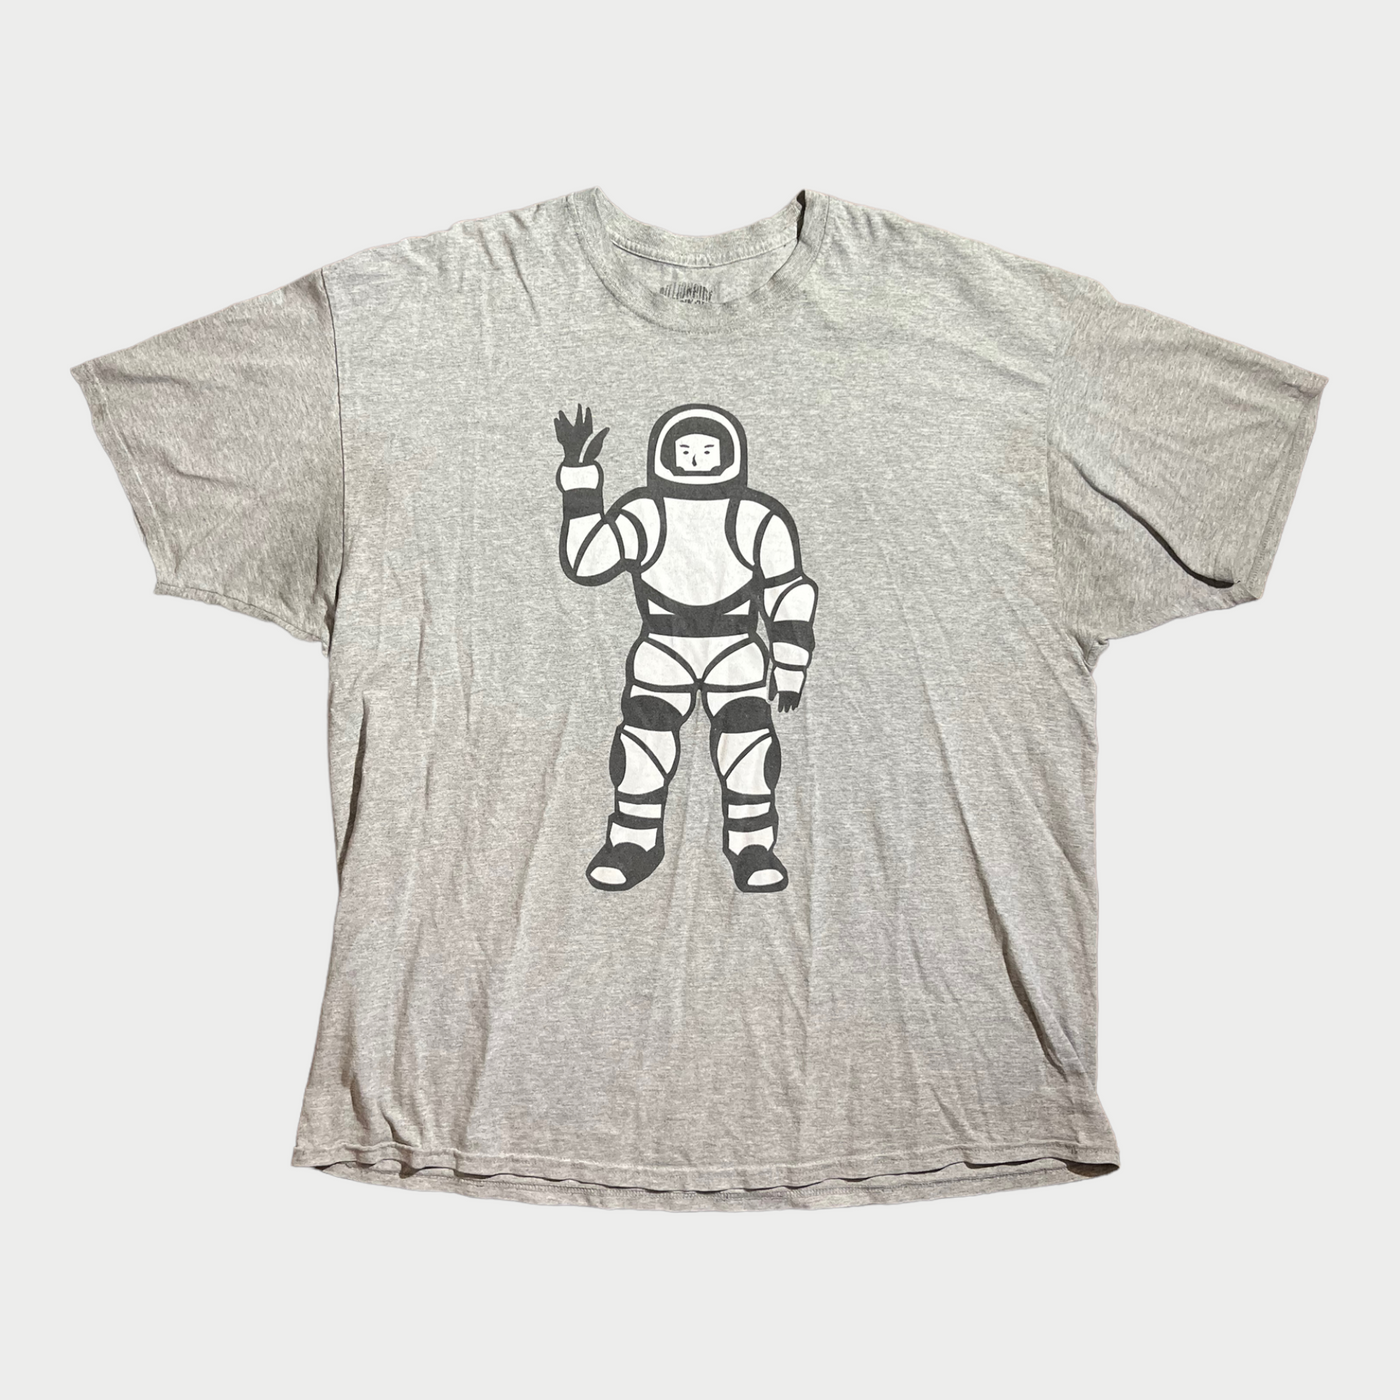 T-shirt With Iconic BBC Astronaut Graphic Front